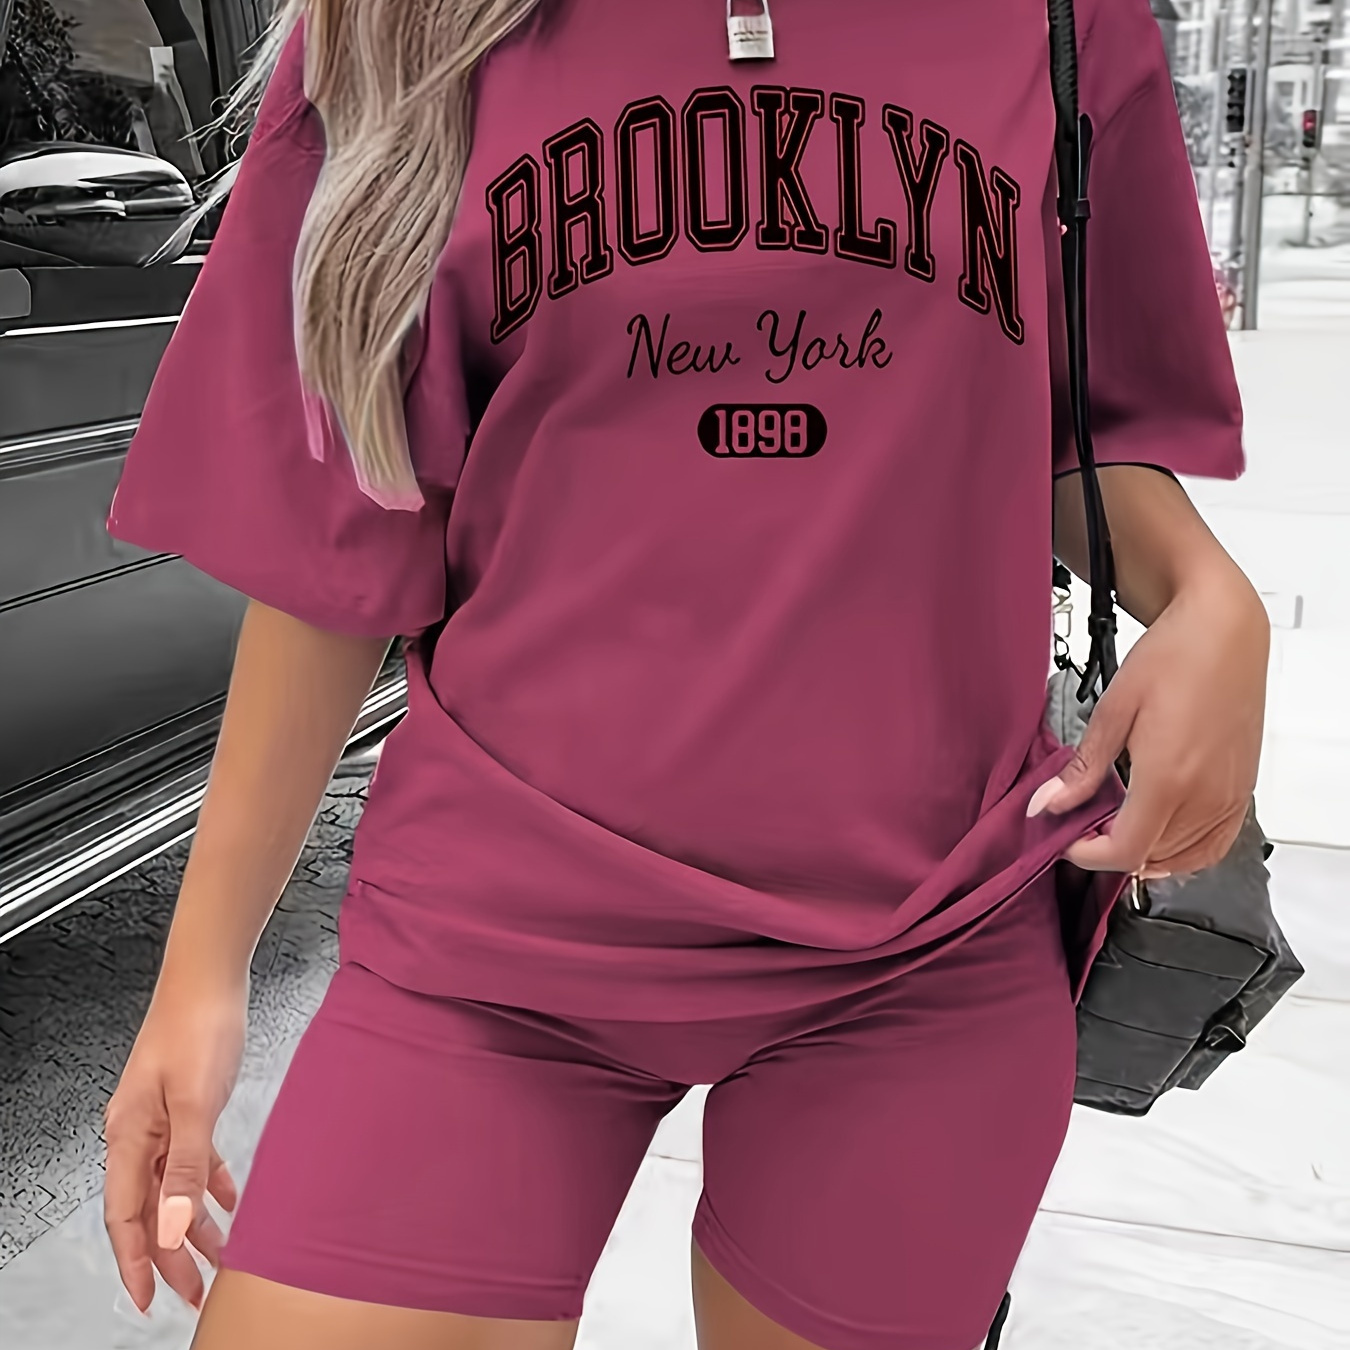 

Brooklyn Print Casual 2 Piece Set, Crew Neck Short Sleeve T-shirt & Skinny Shorts Outfits, Women's Clothing